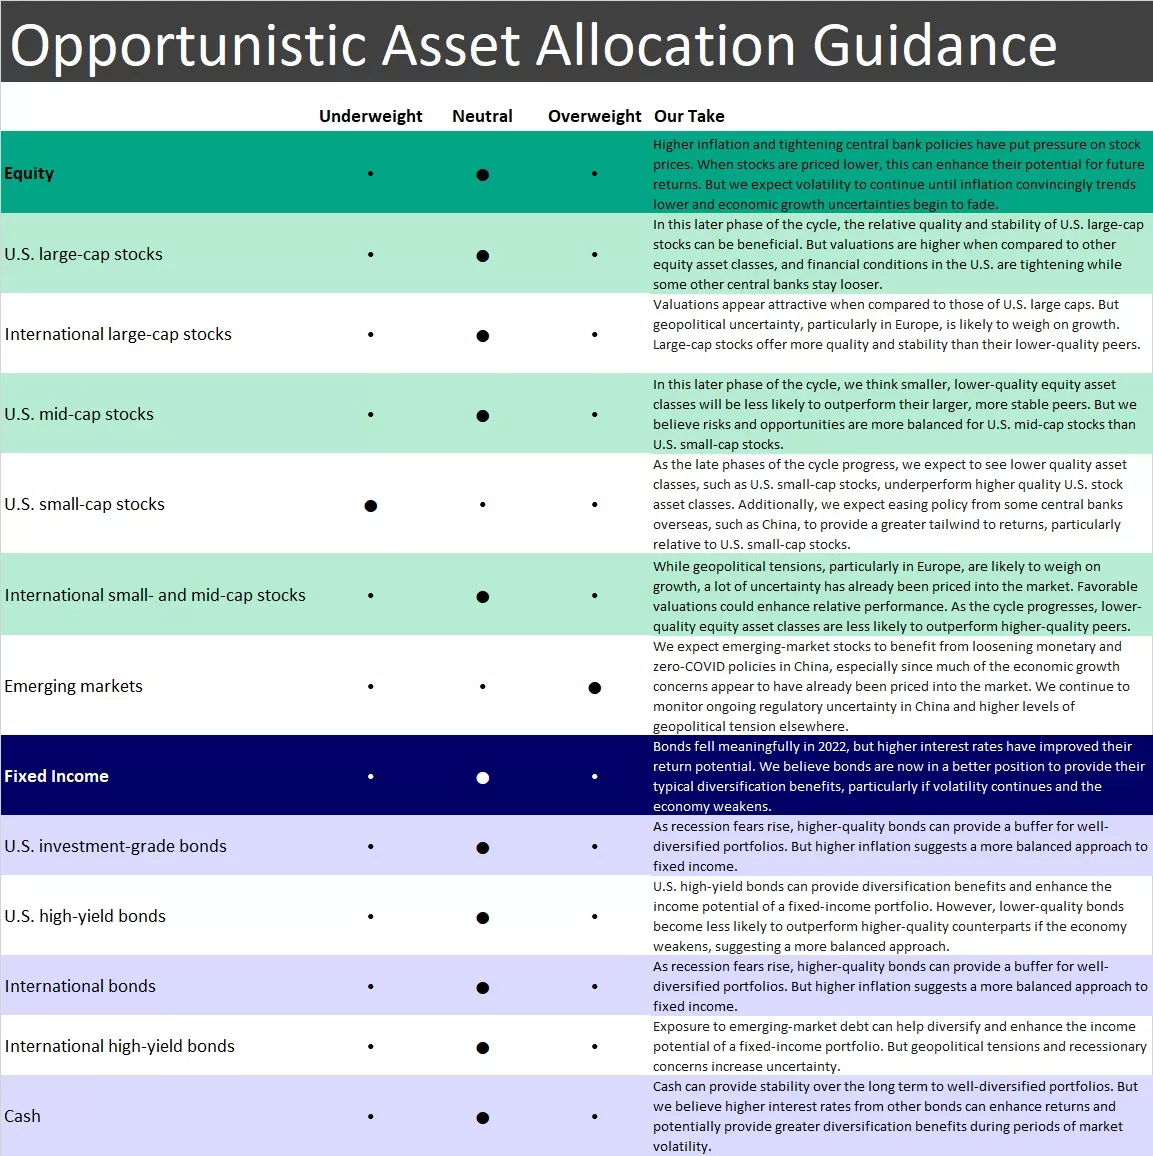  Opportunistic asset allocation guidance
